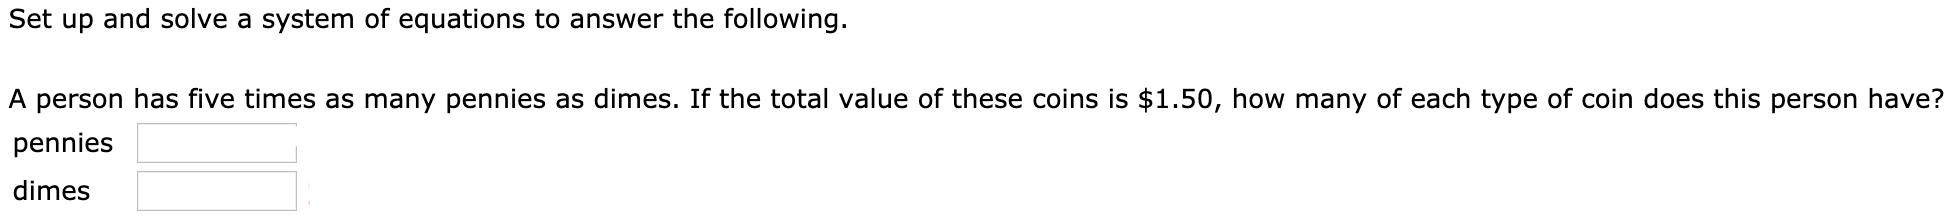 Set up and solve a system of equations to answer the following.
A person has five times as many pennies as dimes. If the total value of these coins is $1.50, how many of each type of coin does this person have?
pennies
dimes
